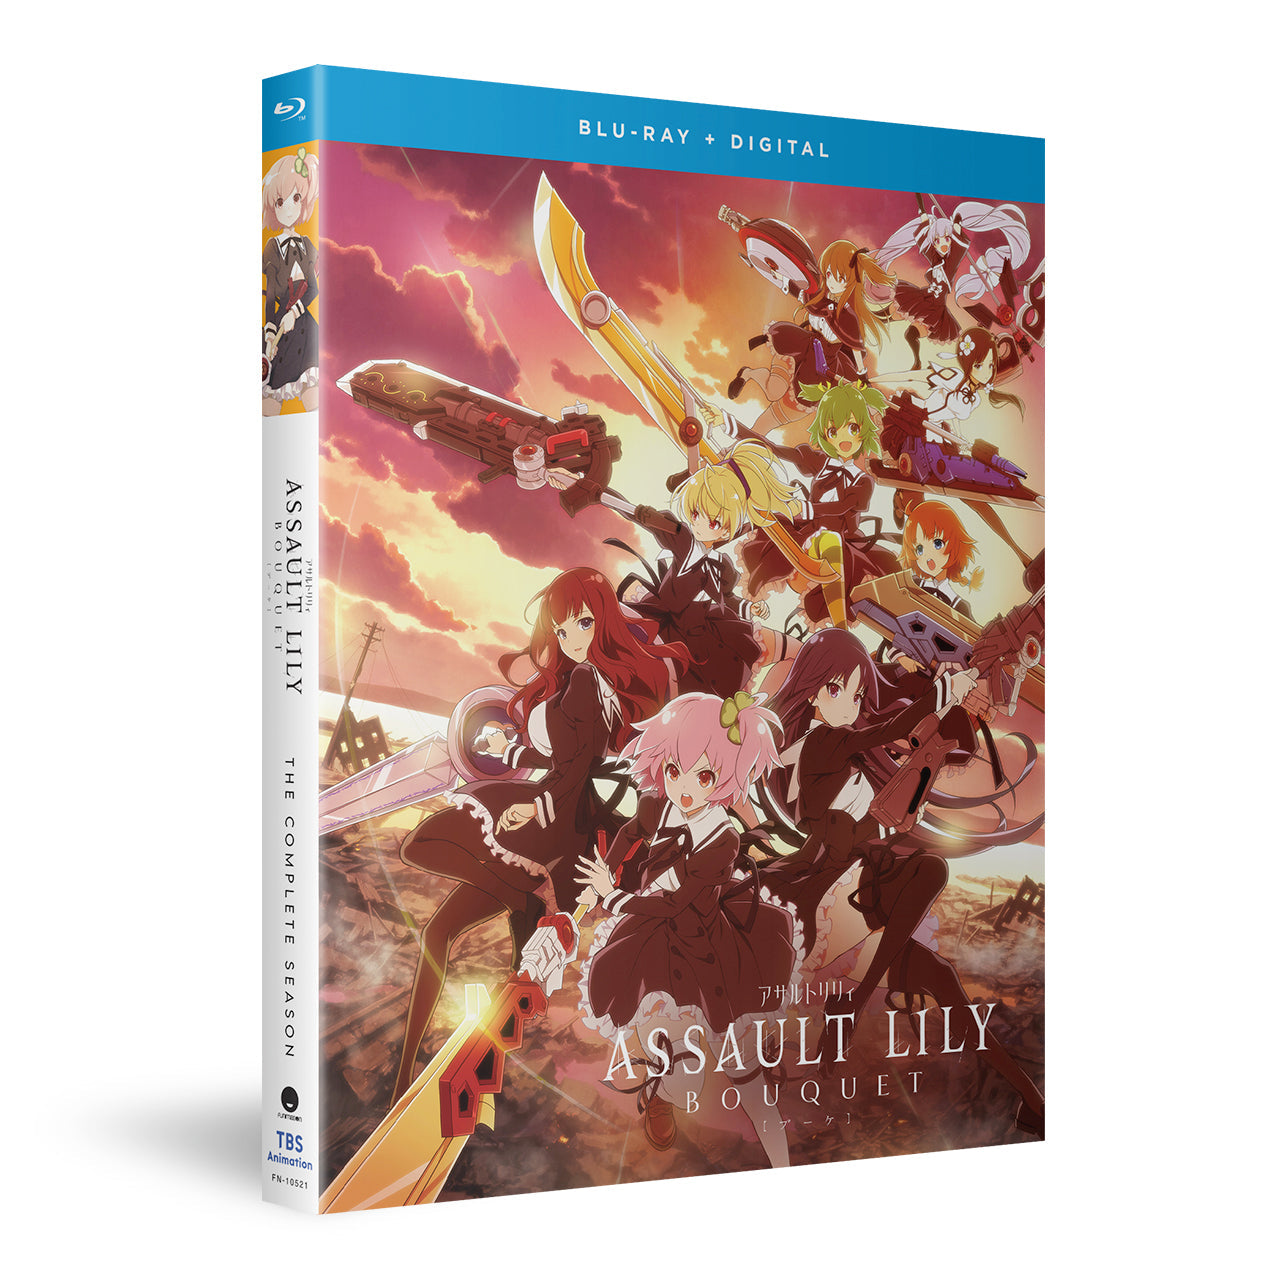 Assault Lily: Bouquet - The Complete Season - Blu-ray image count 2